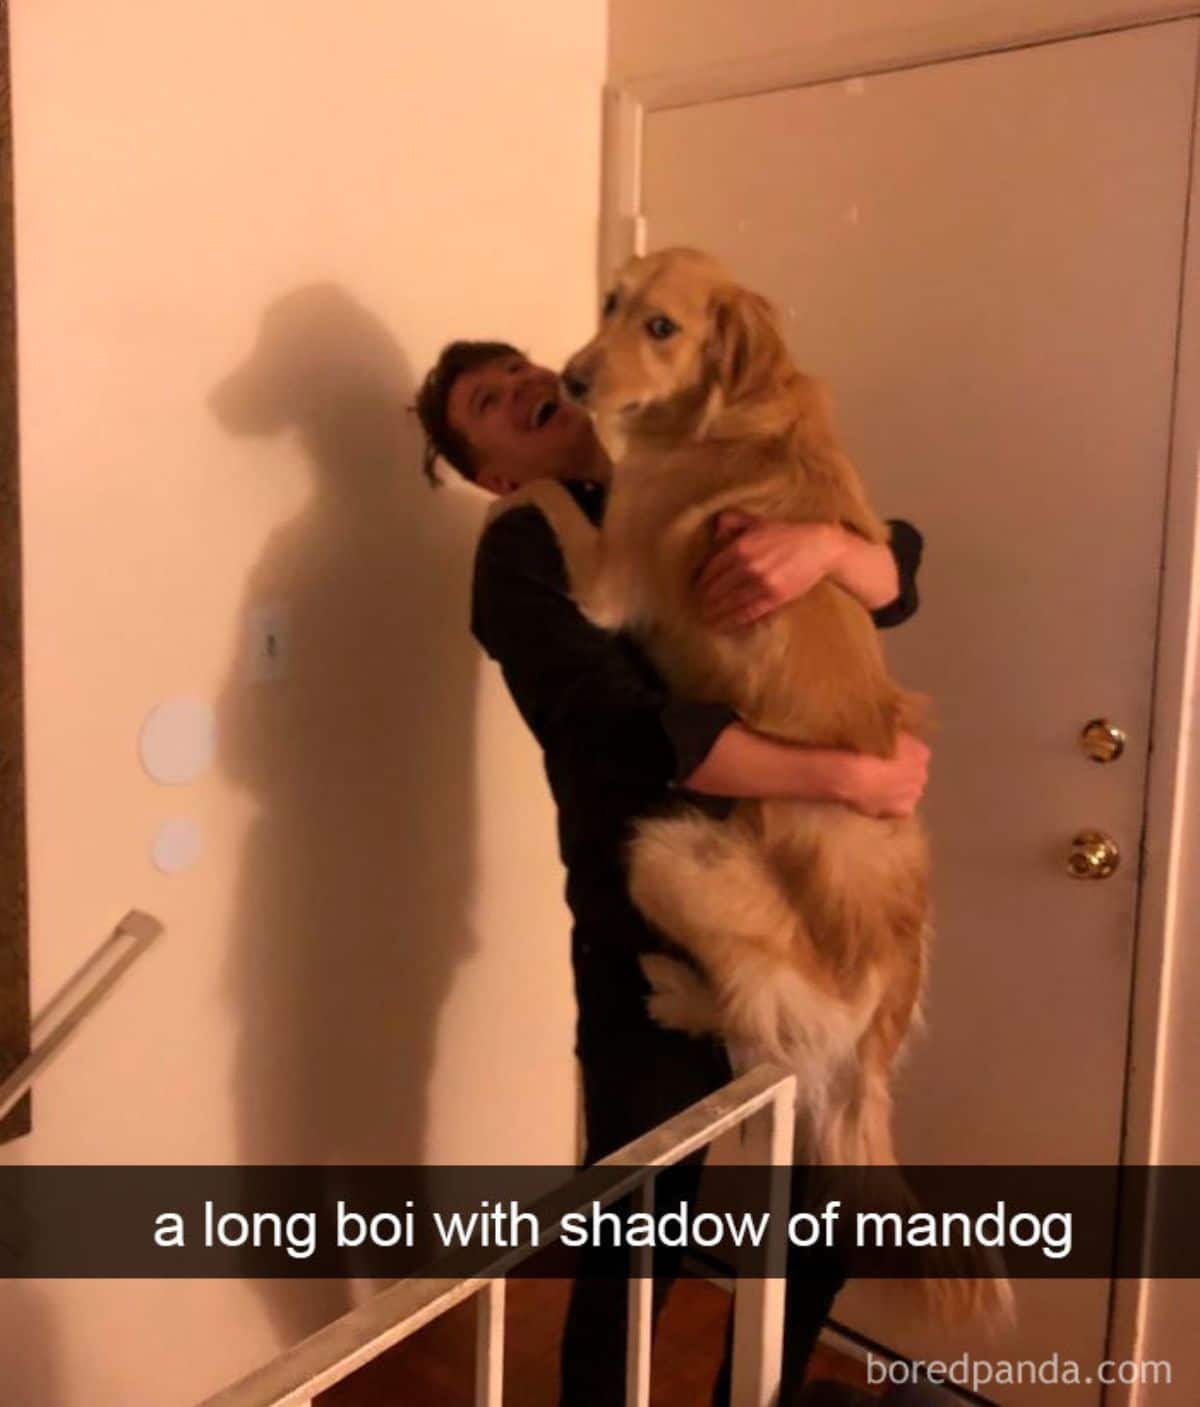 golden retriever being carried by a man with their shadow cast on the wall behind them with a caption saying a long boi with shadow of mandog